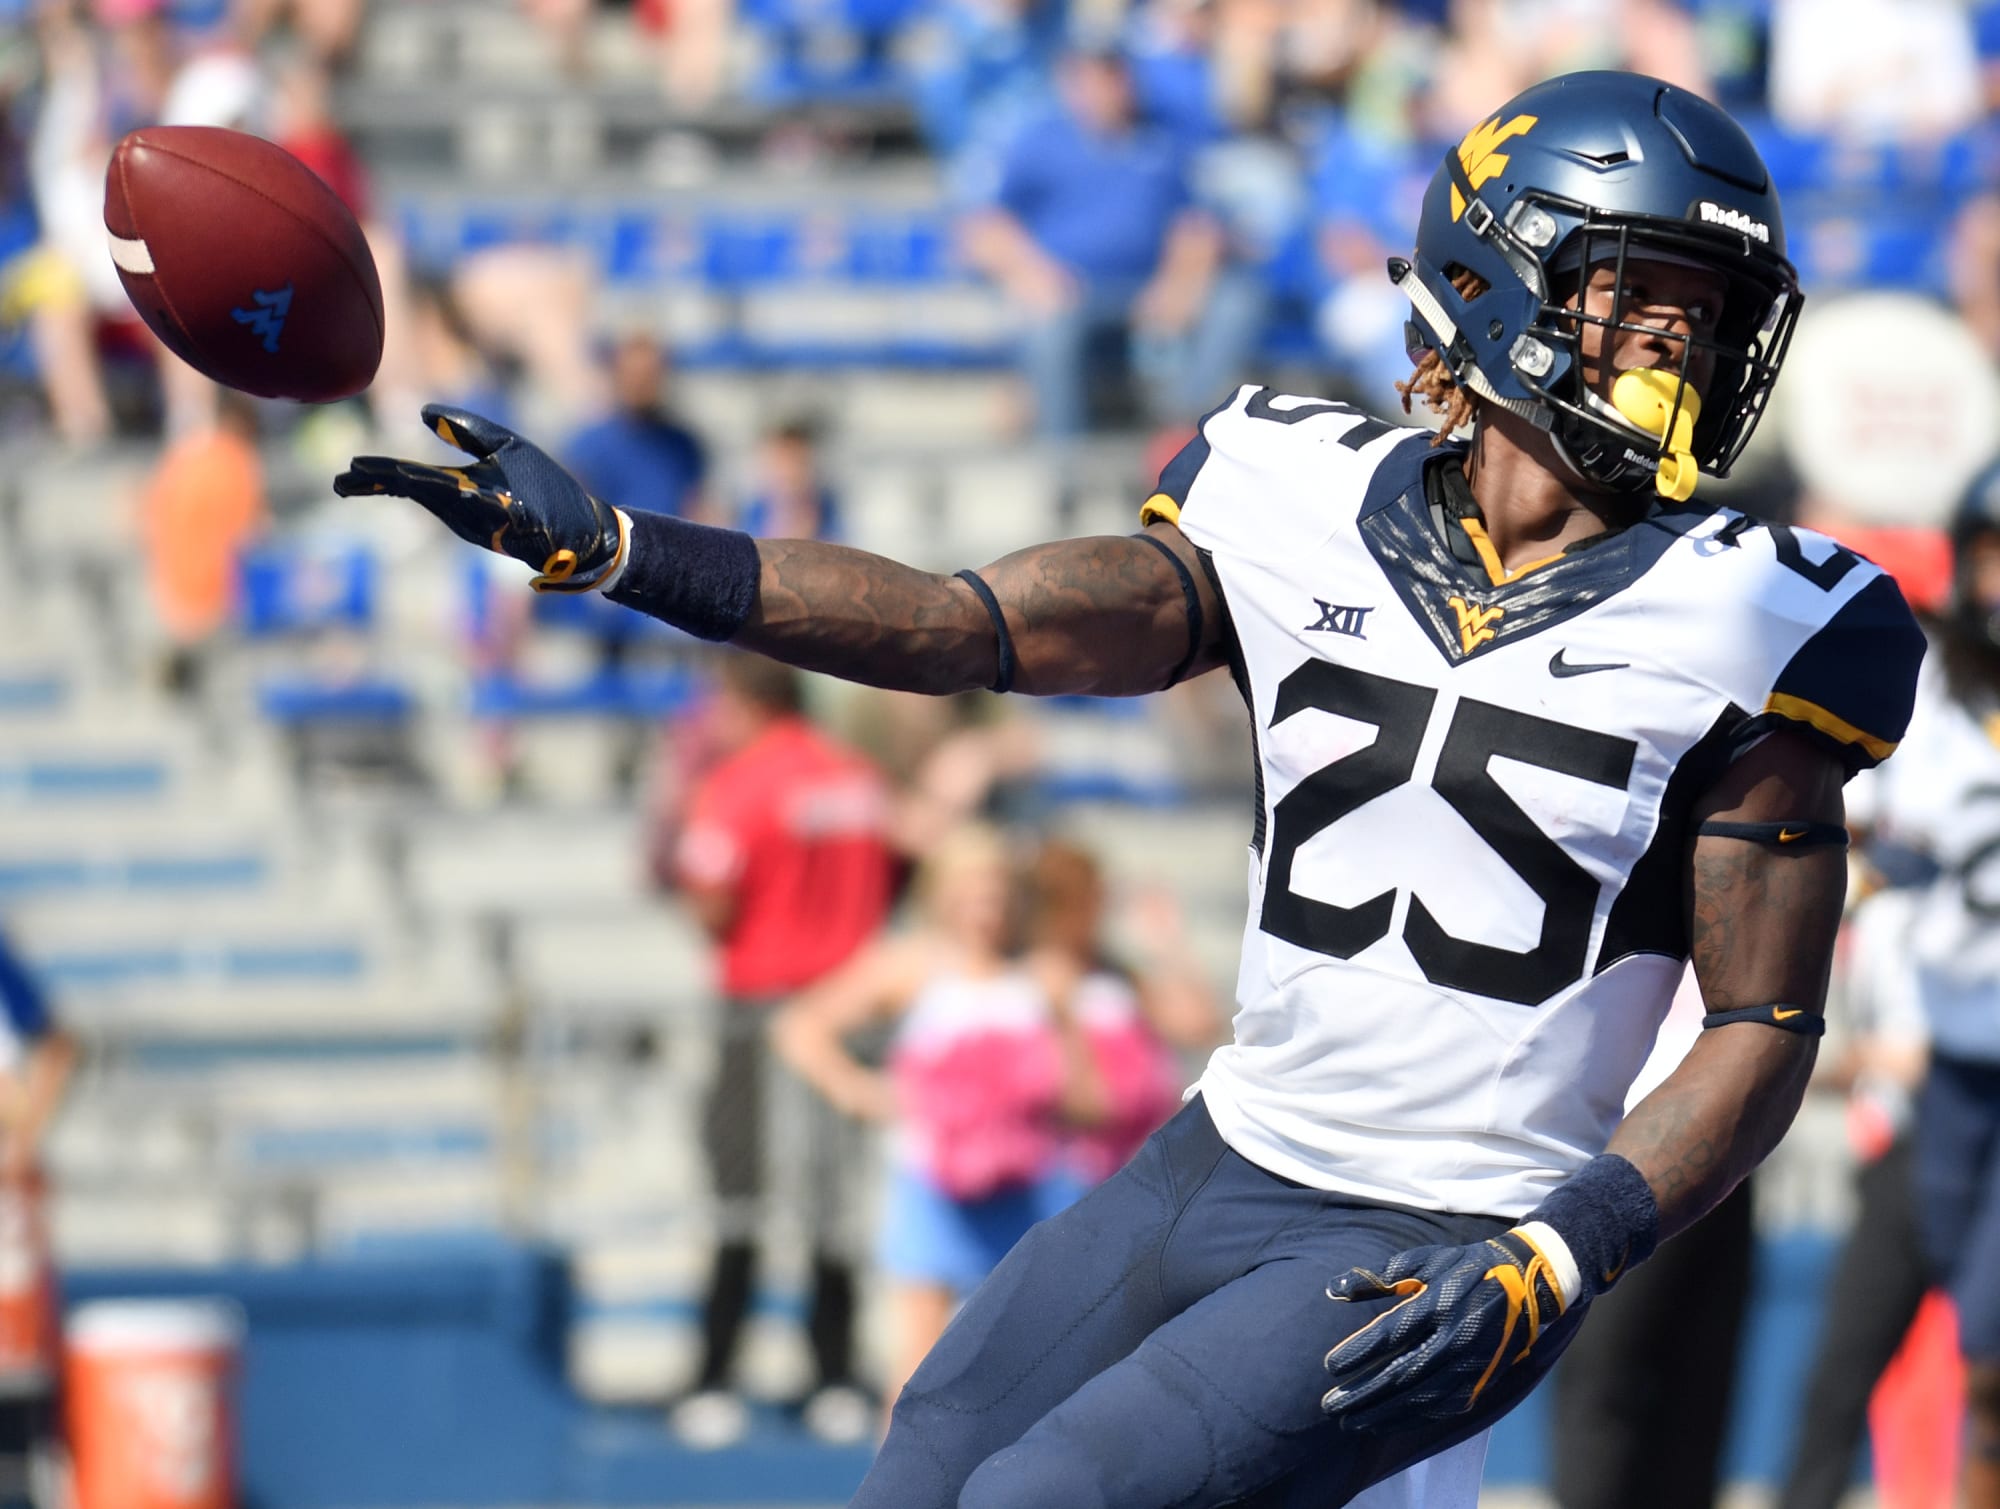 WVU RB Justin Crawford will sit out Heart of Dallas Bowl